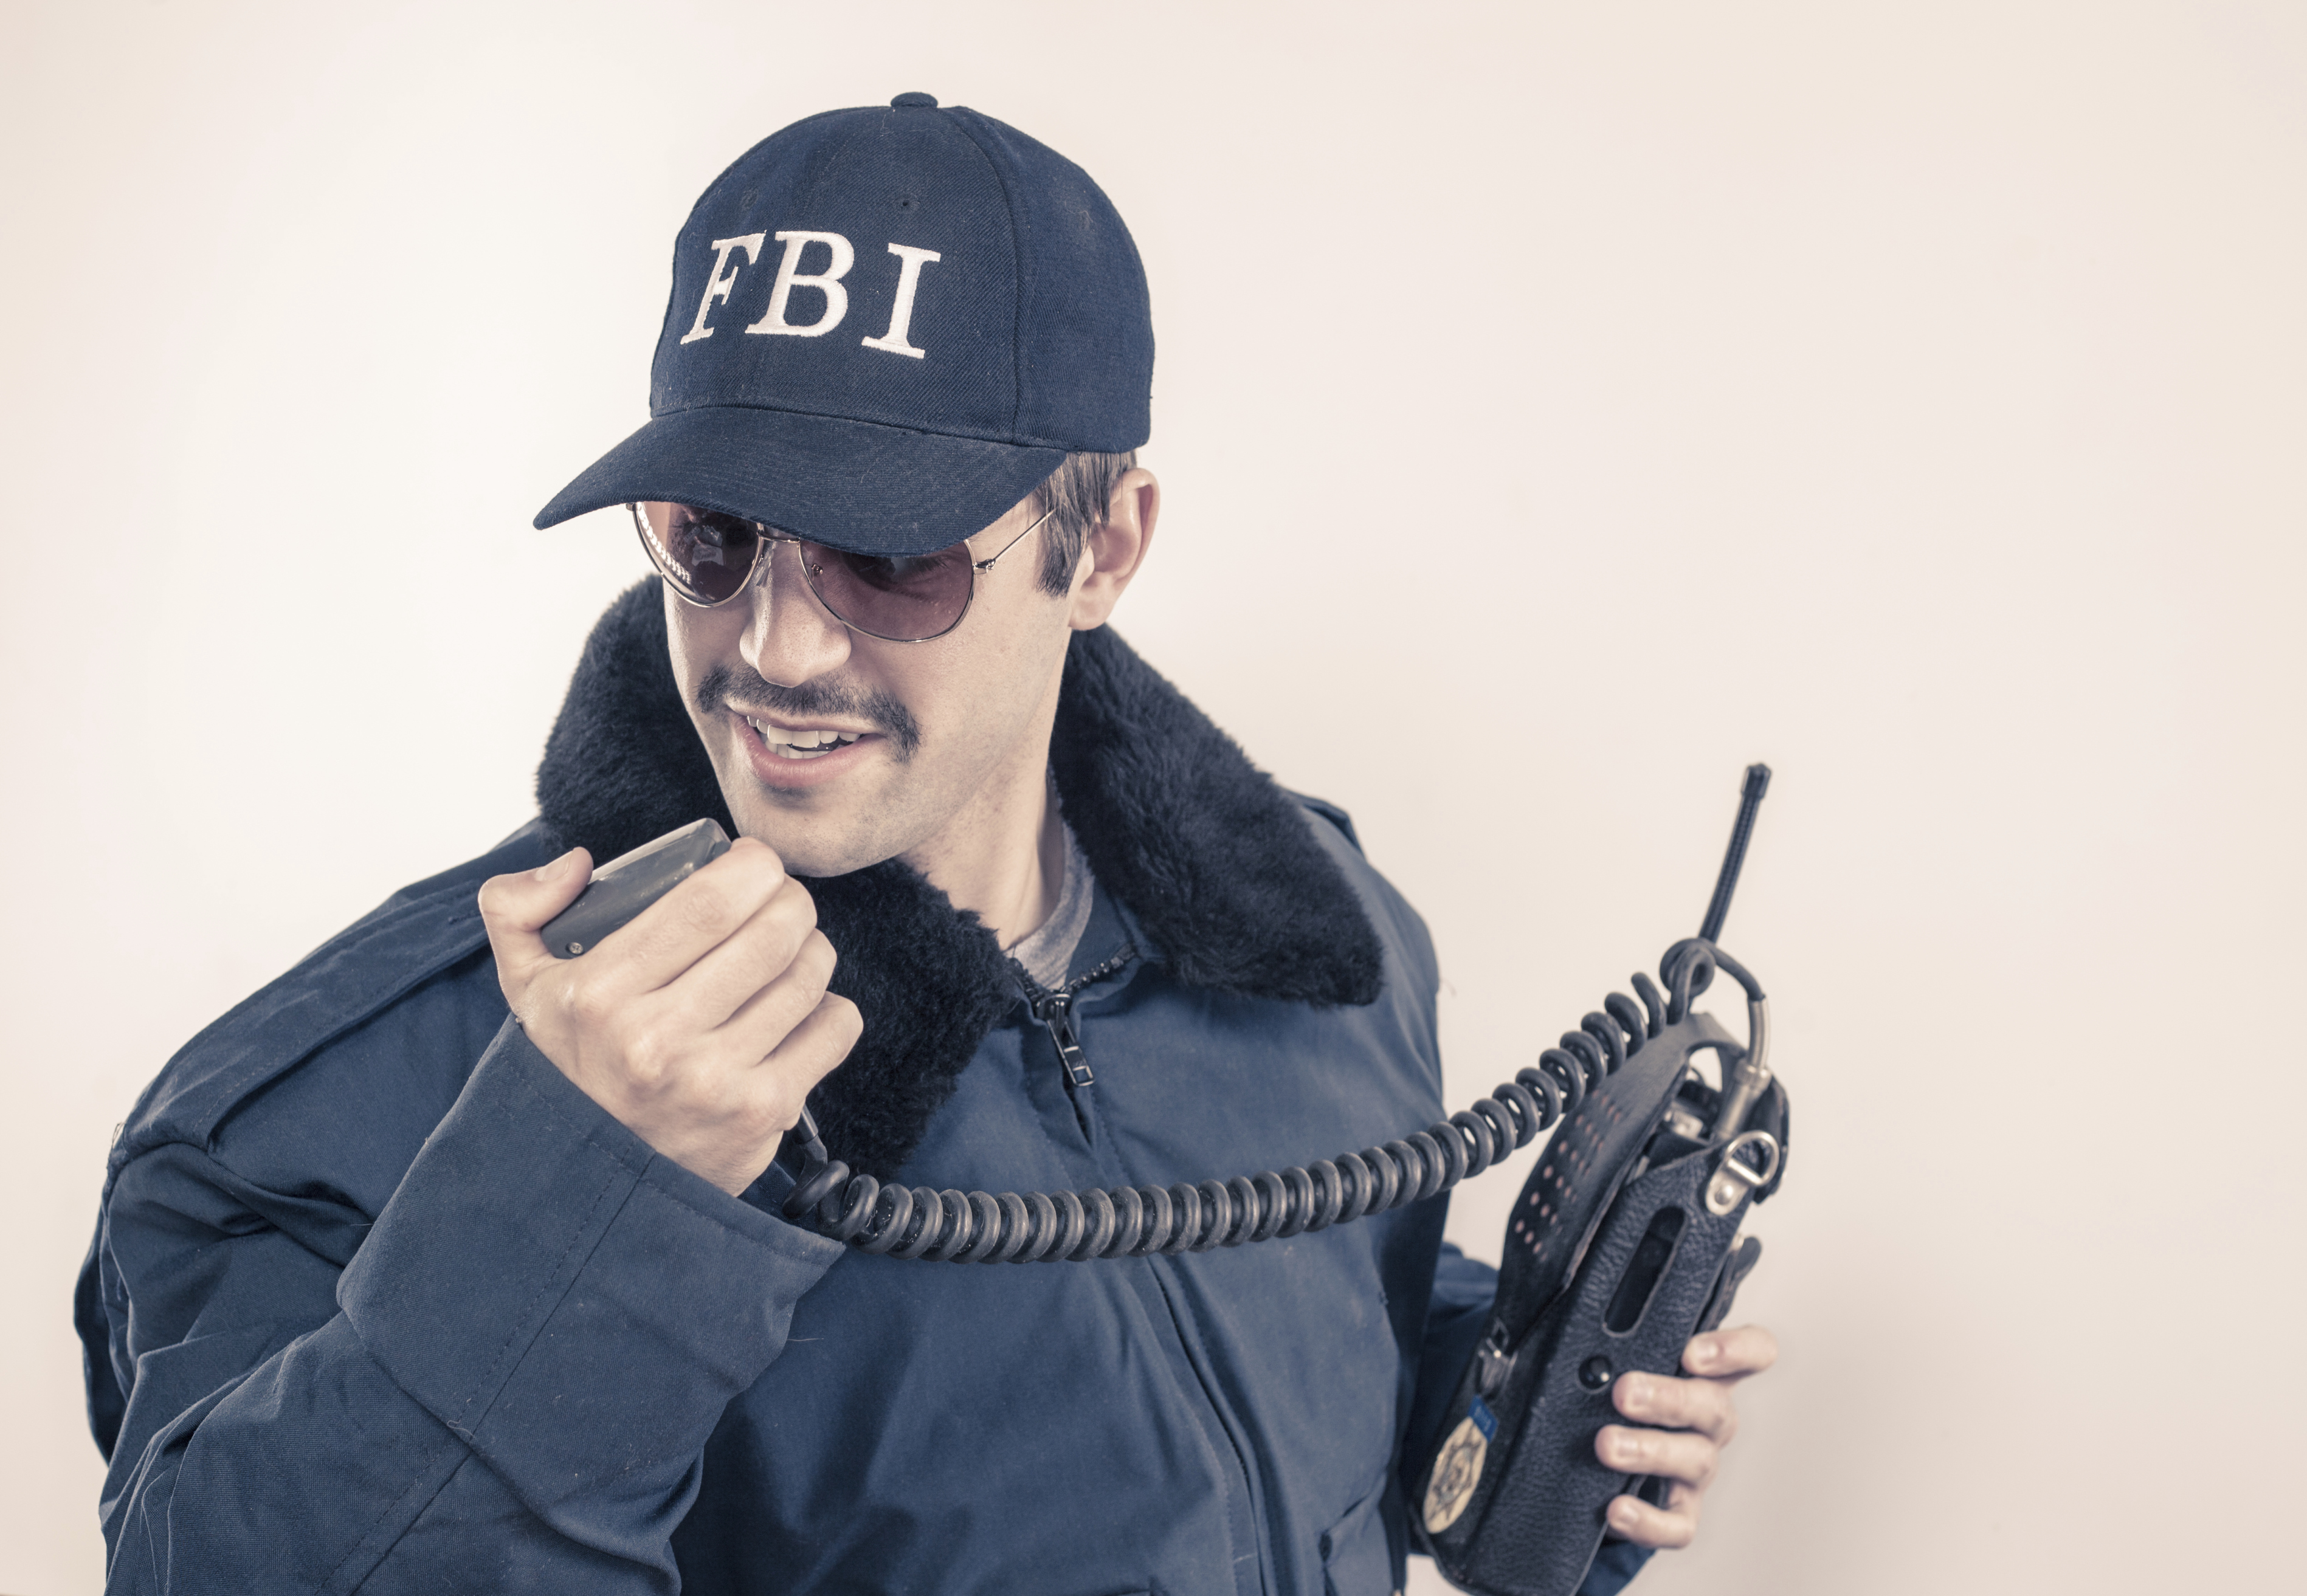 The FBI Is Investigating Your Home?! Nope, That Was Just A Bad Sales Call